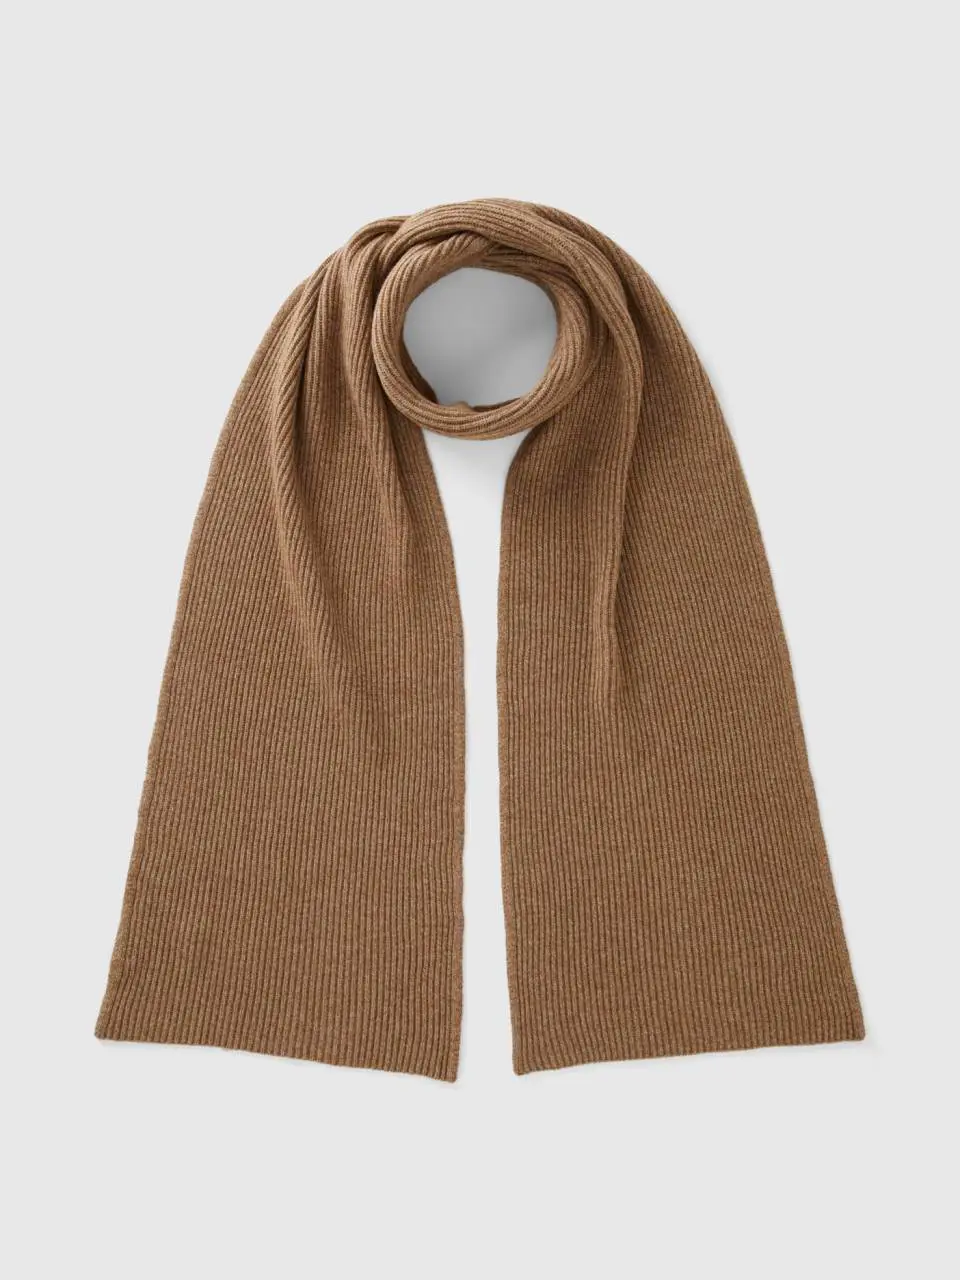 Benetton scarf in wool and cashmere blend. 1